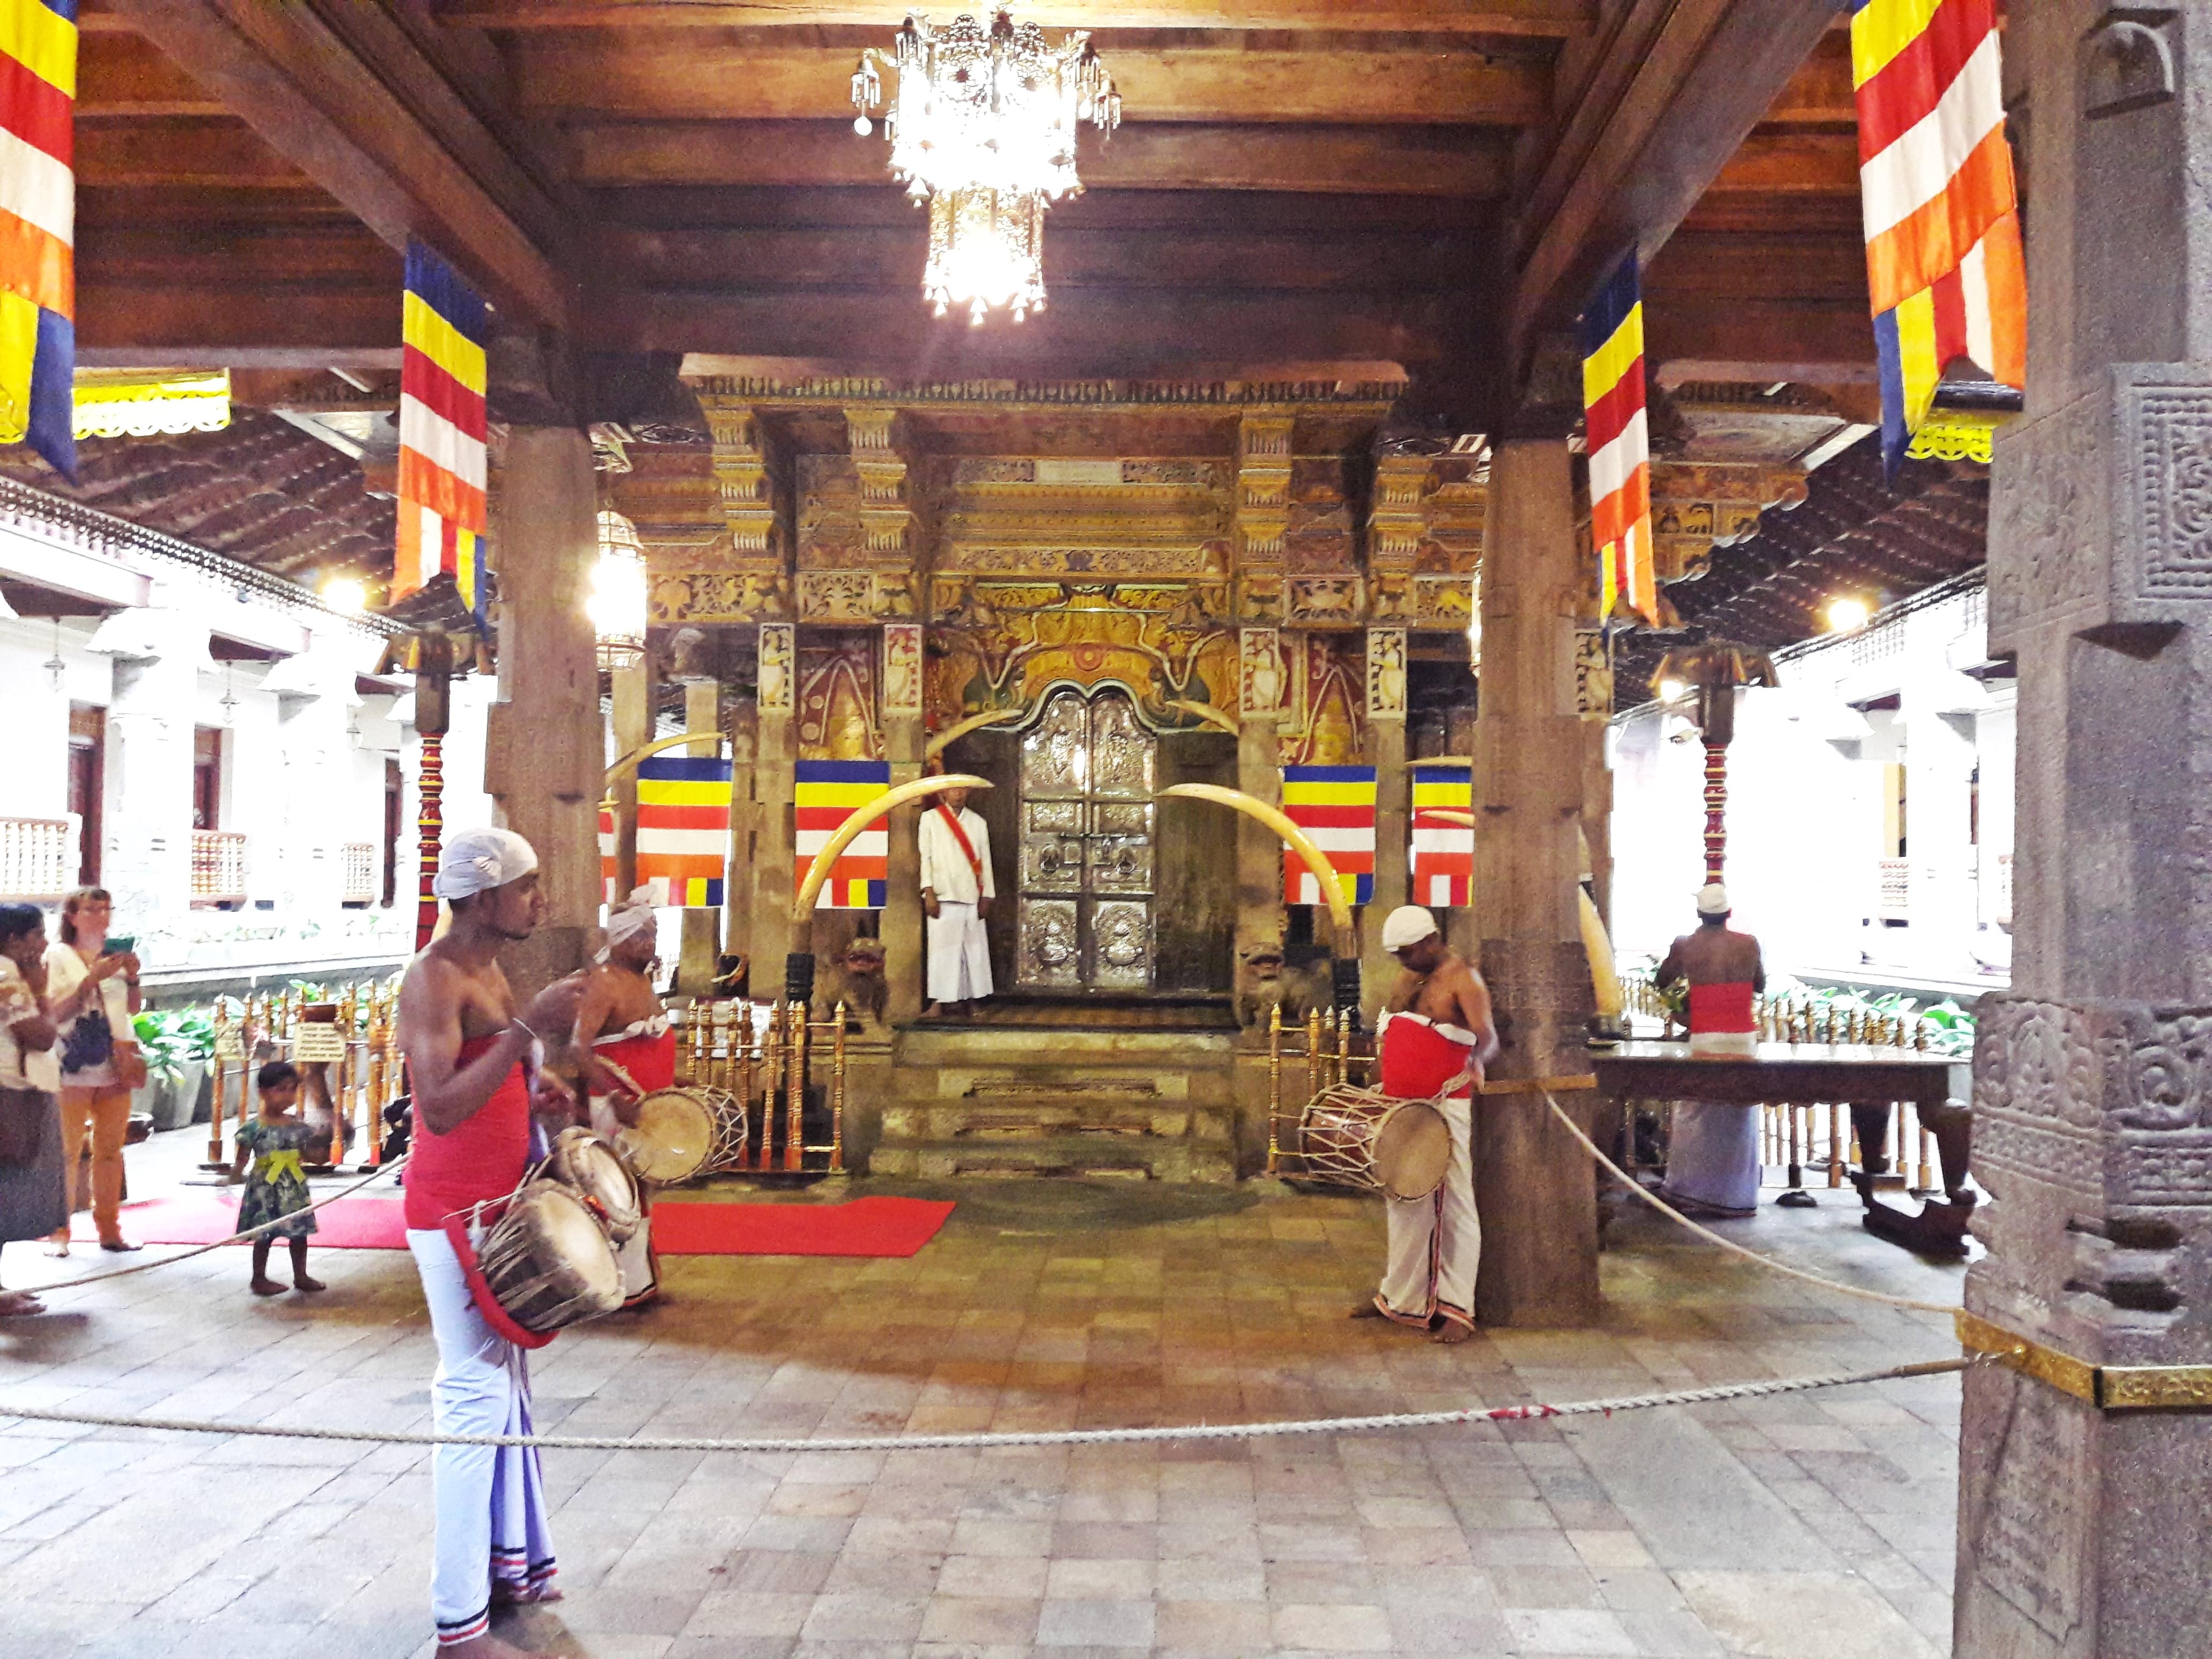 The traditional ceremony happening inside the Temple of Tooth Relic